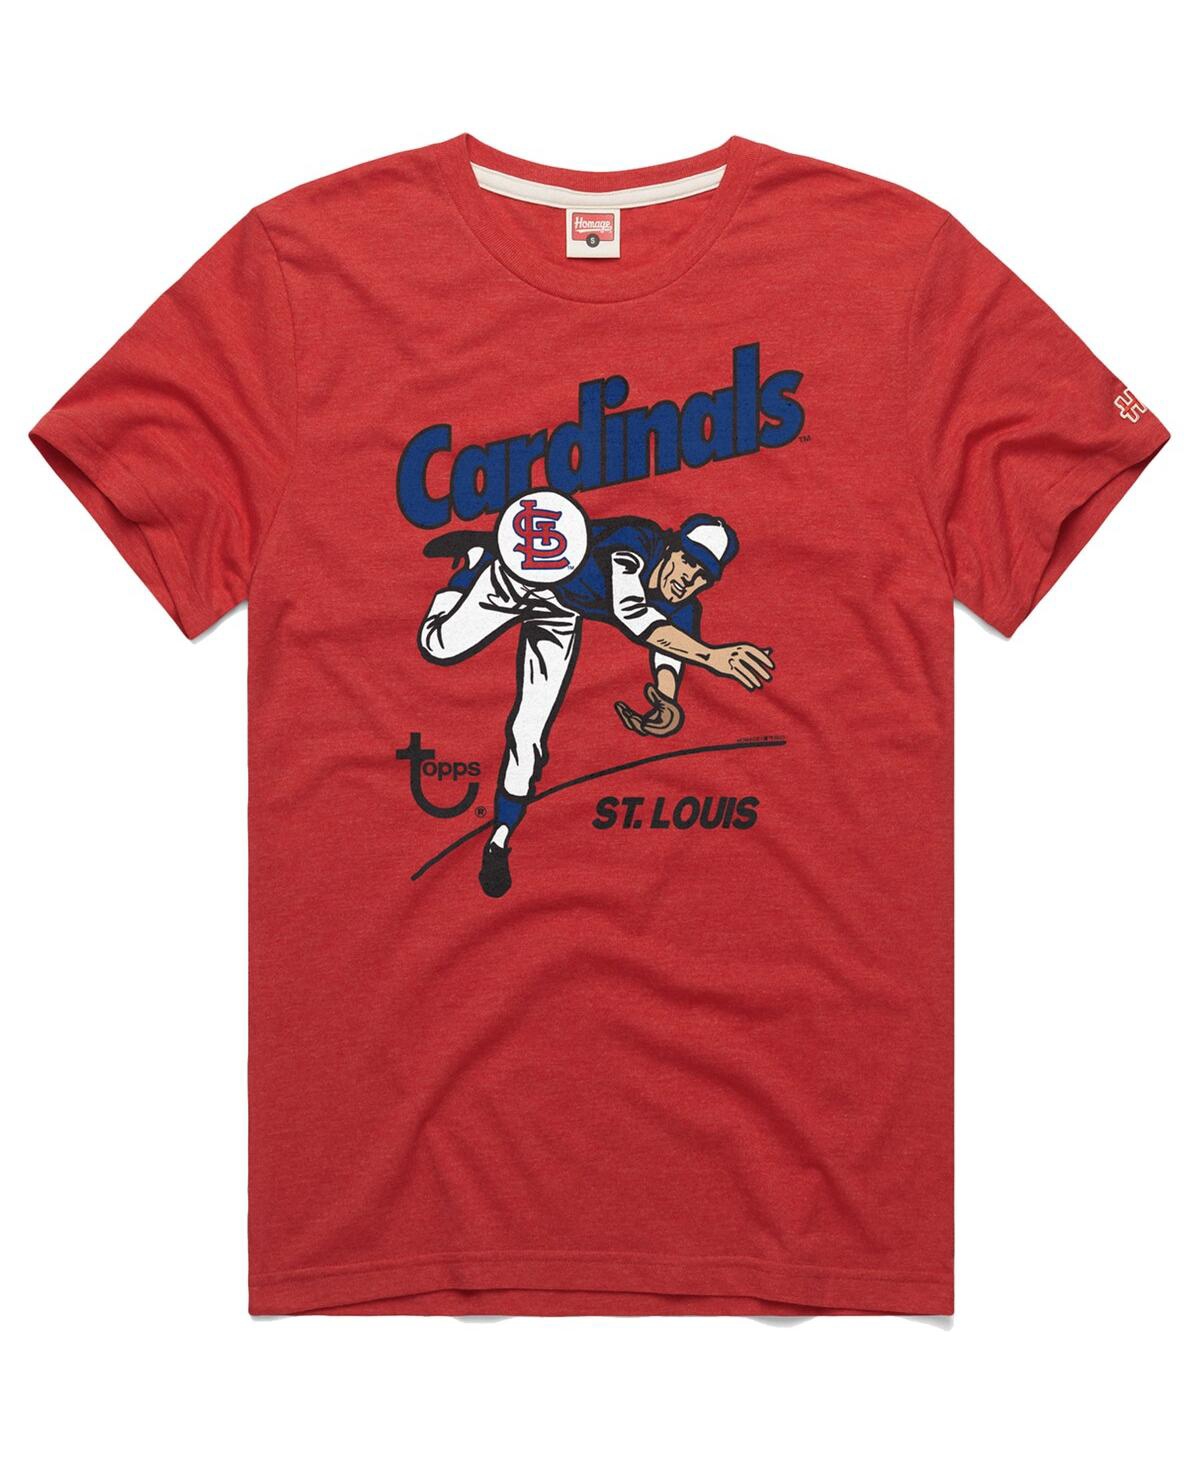 Men's Homage x Topps Distressed Red St. Louis Cardinals Tri-Blend T-shirt - Red